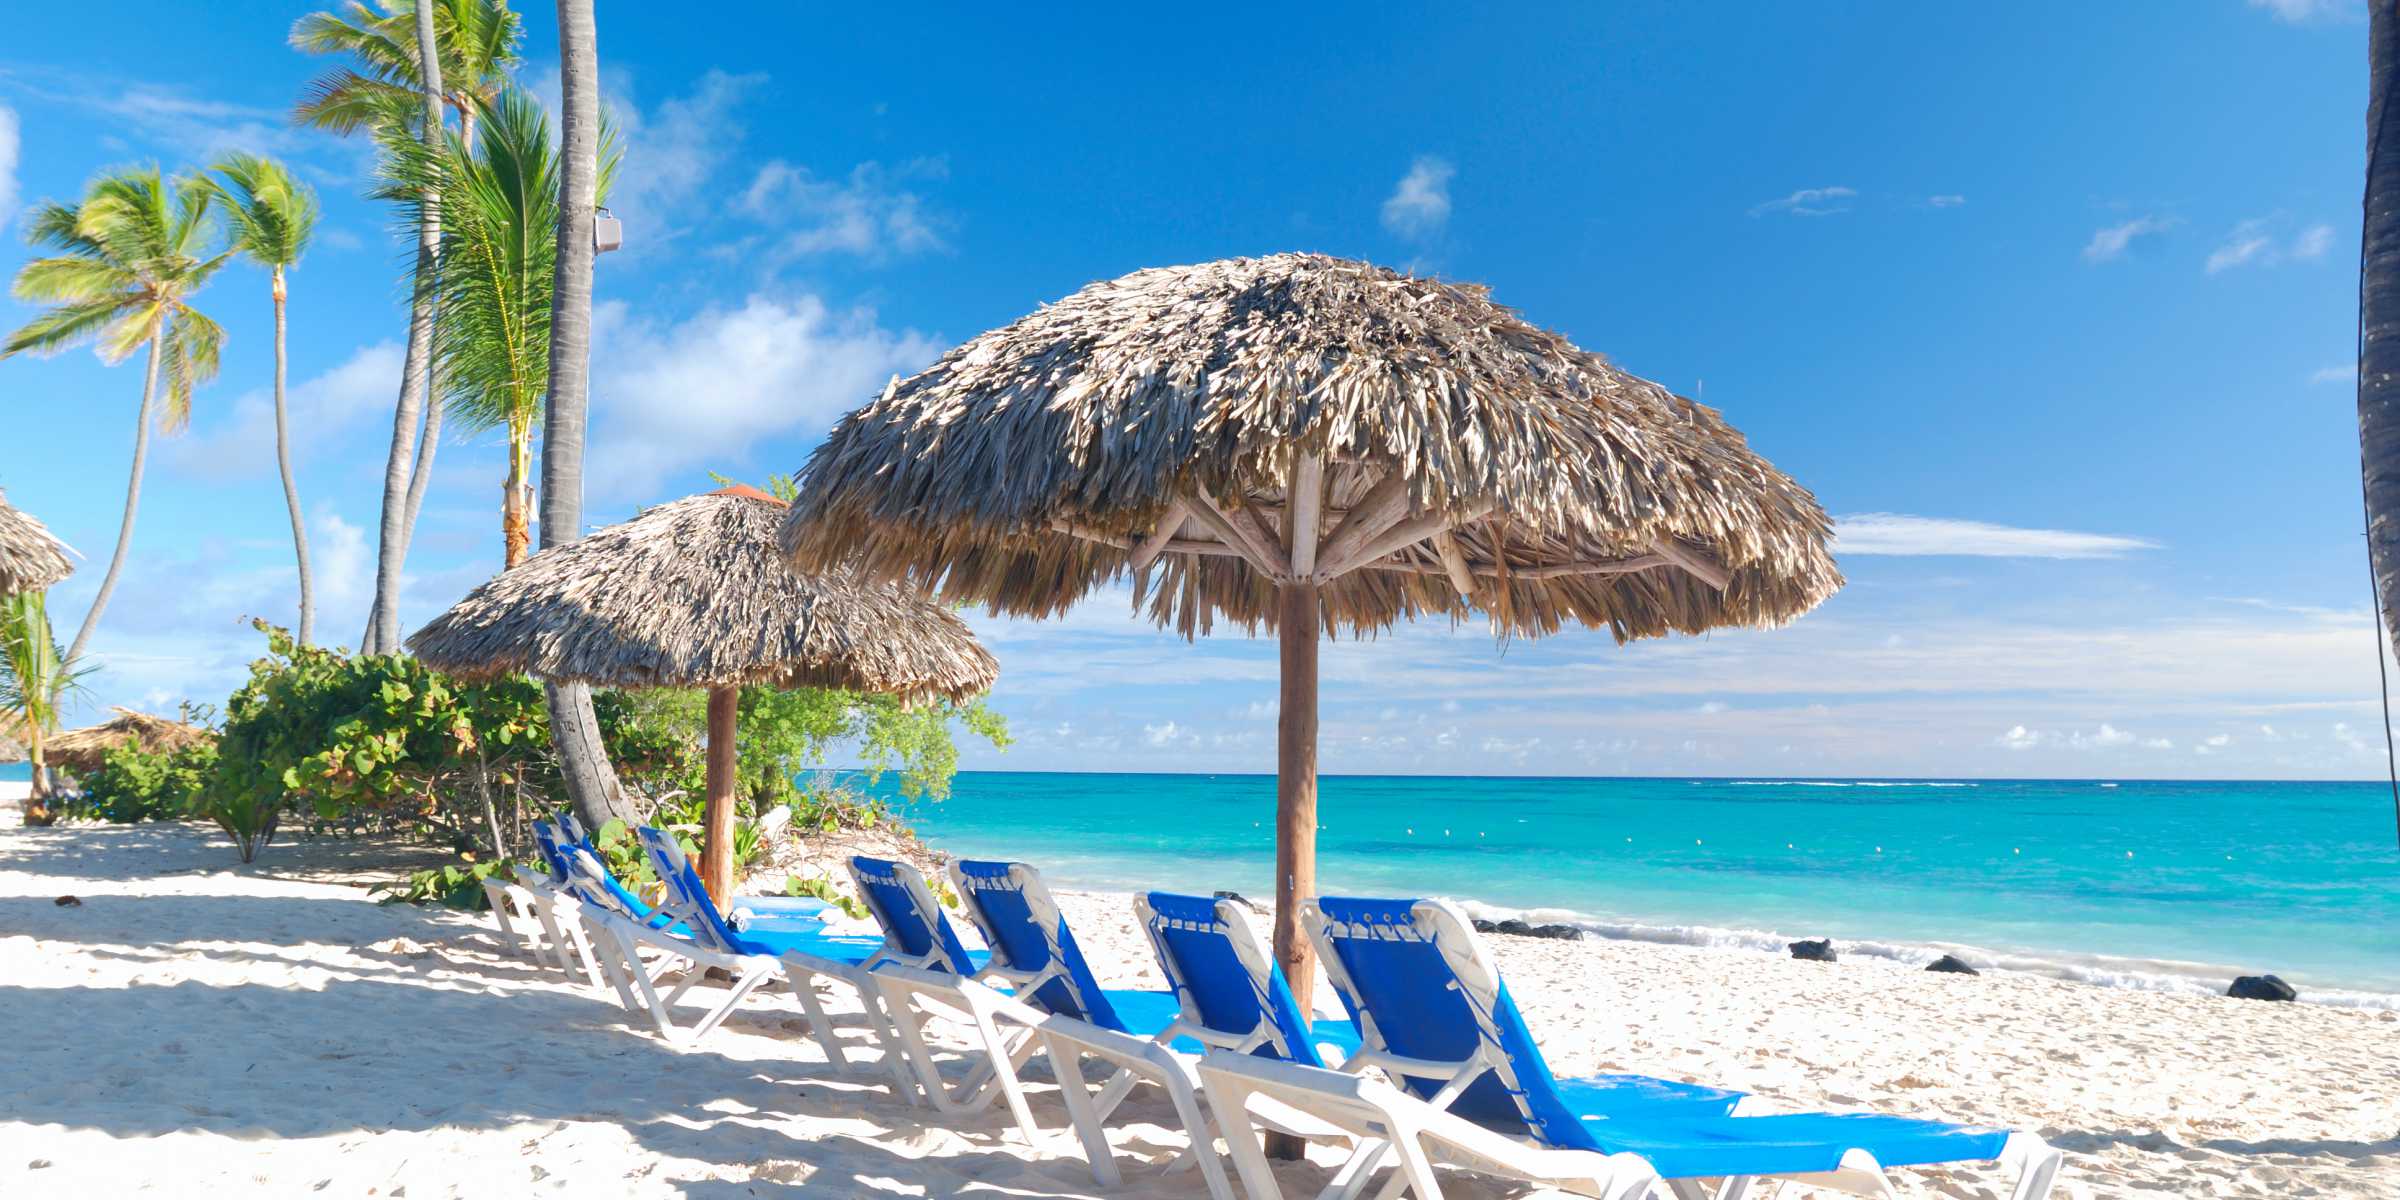 Find the Best Beaches in the DR & Perfect Your Tan